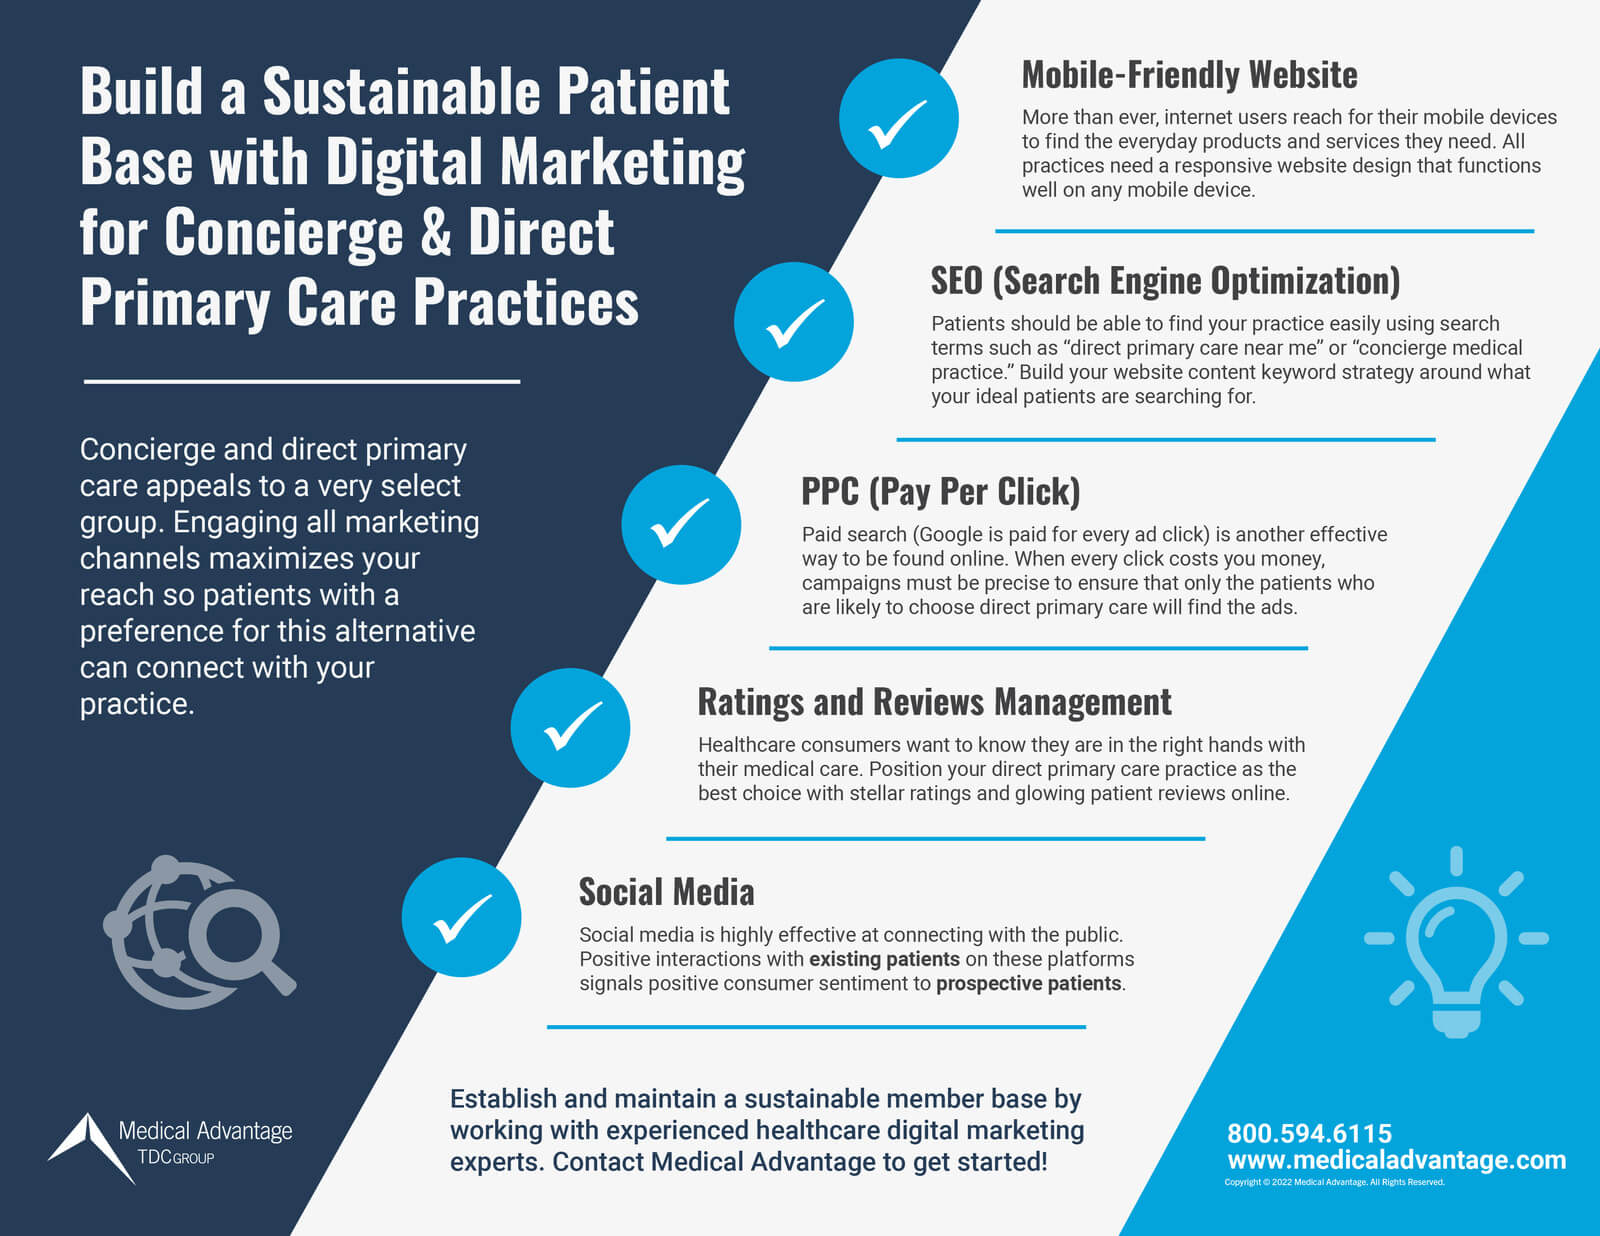 Digital Marketing for Concierge & Direct Primary Care Medical Practices Infographic